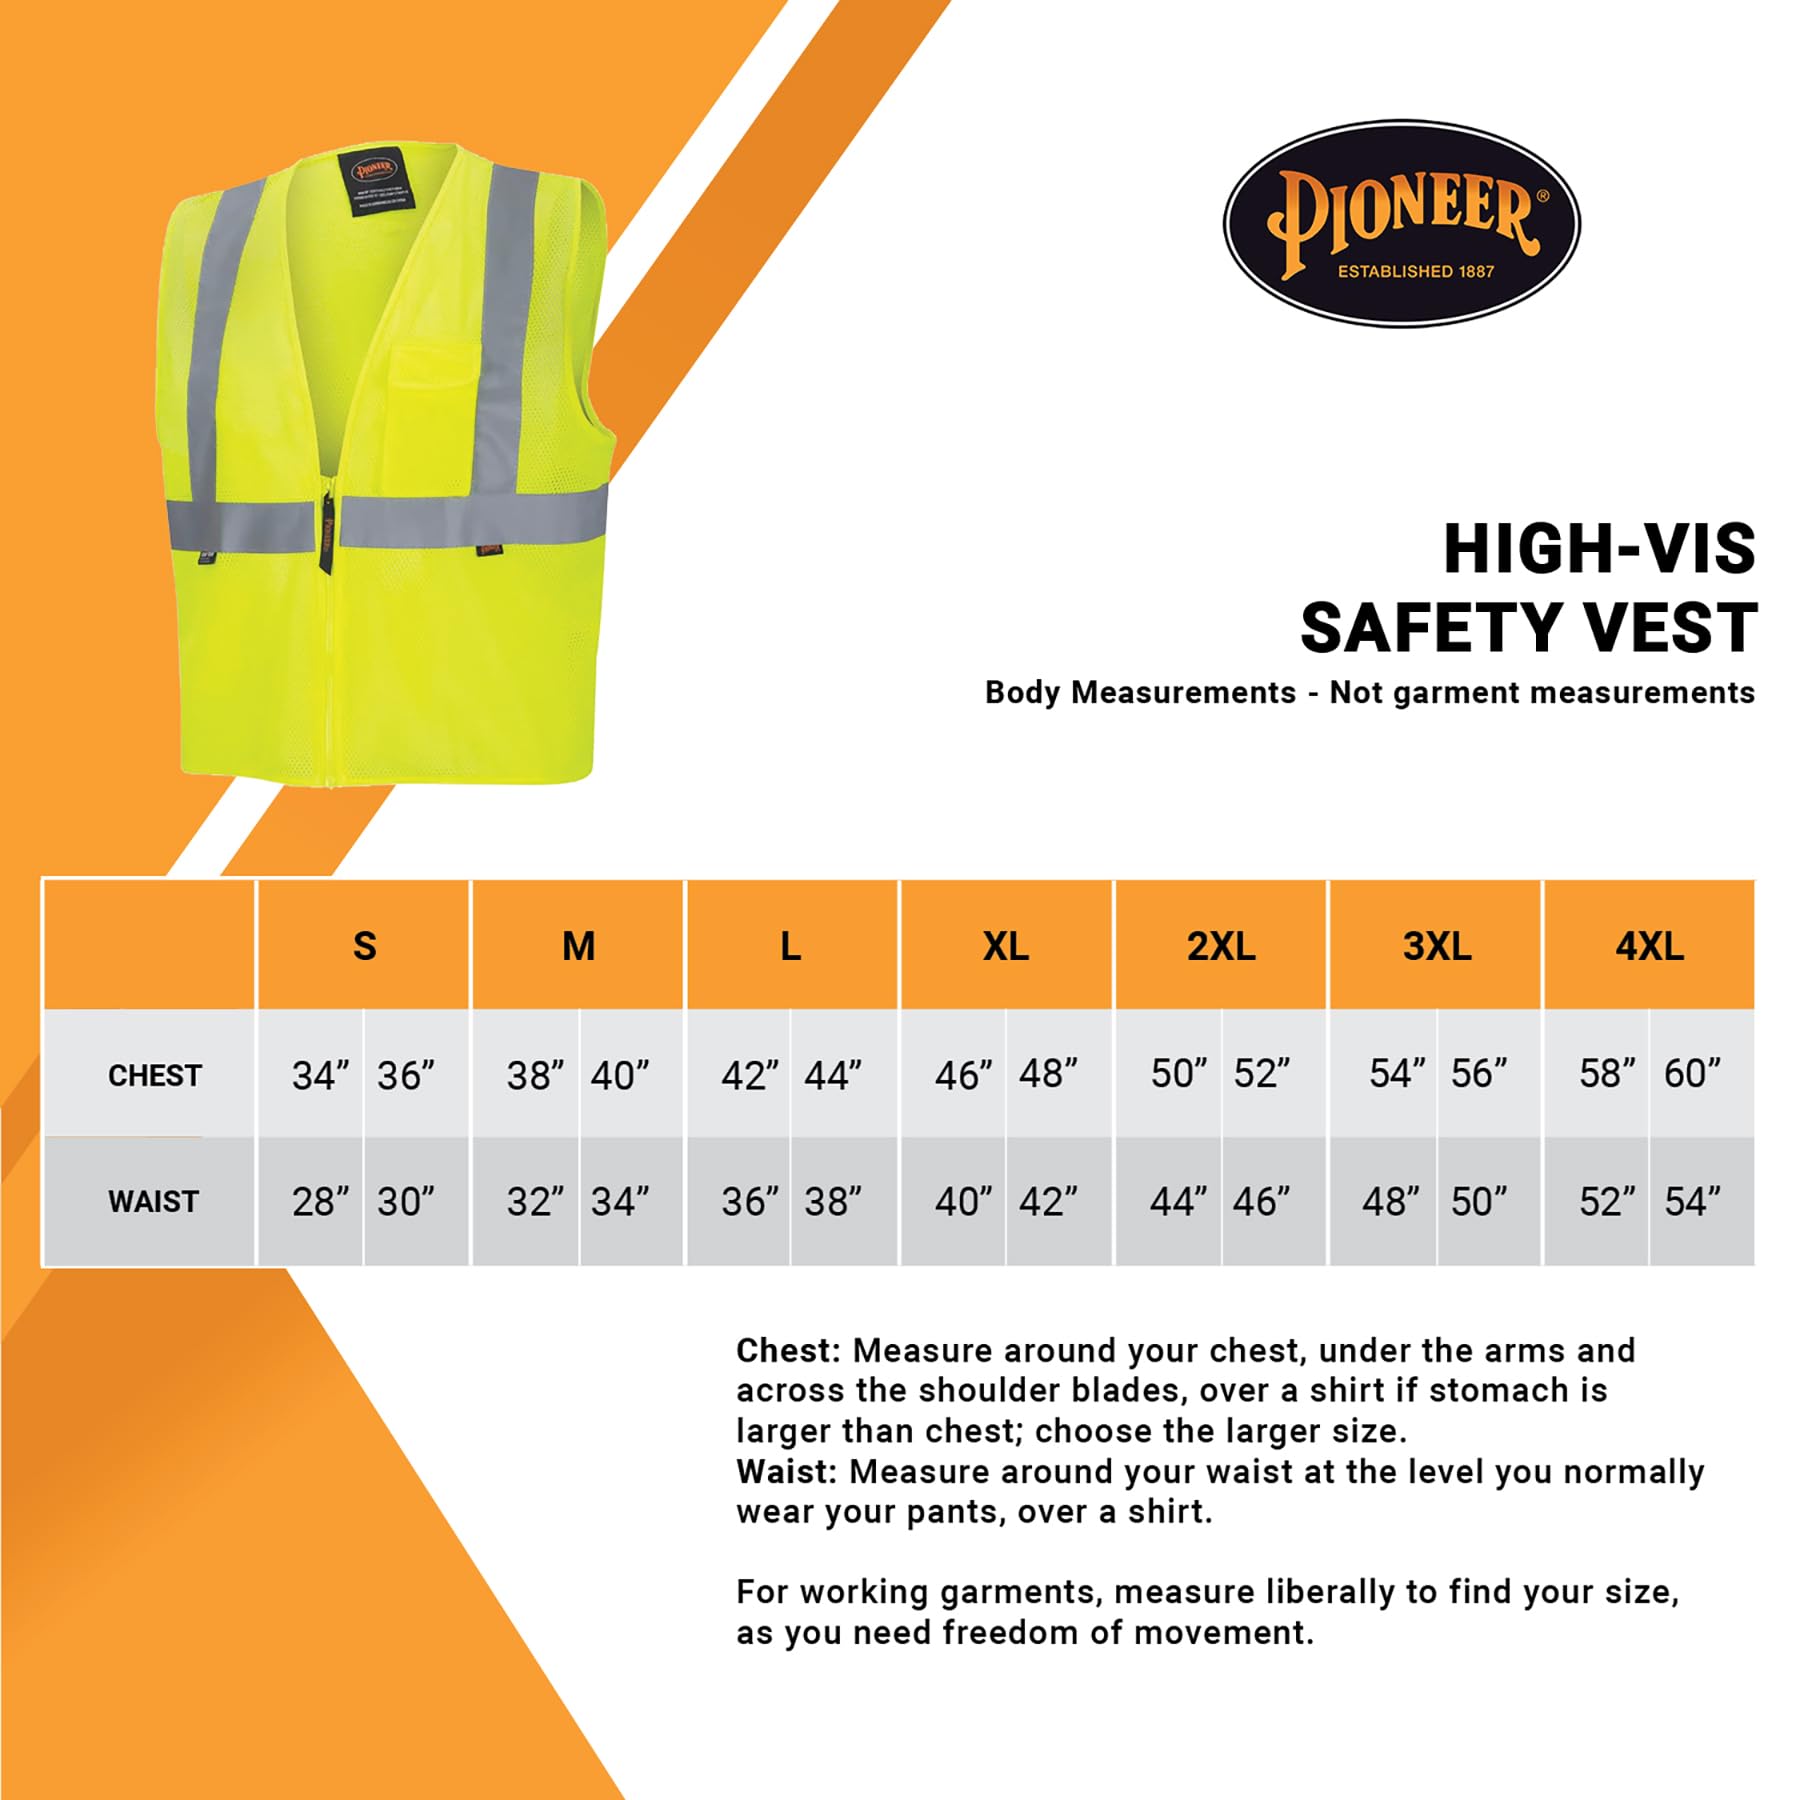 Pioneer High Visibility Safety Vest, Tricot Polyester Mesh, Zip-Up, Reflective Tape, Yellow/Green, Unisex, V1060360U-L, Large